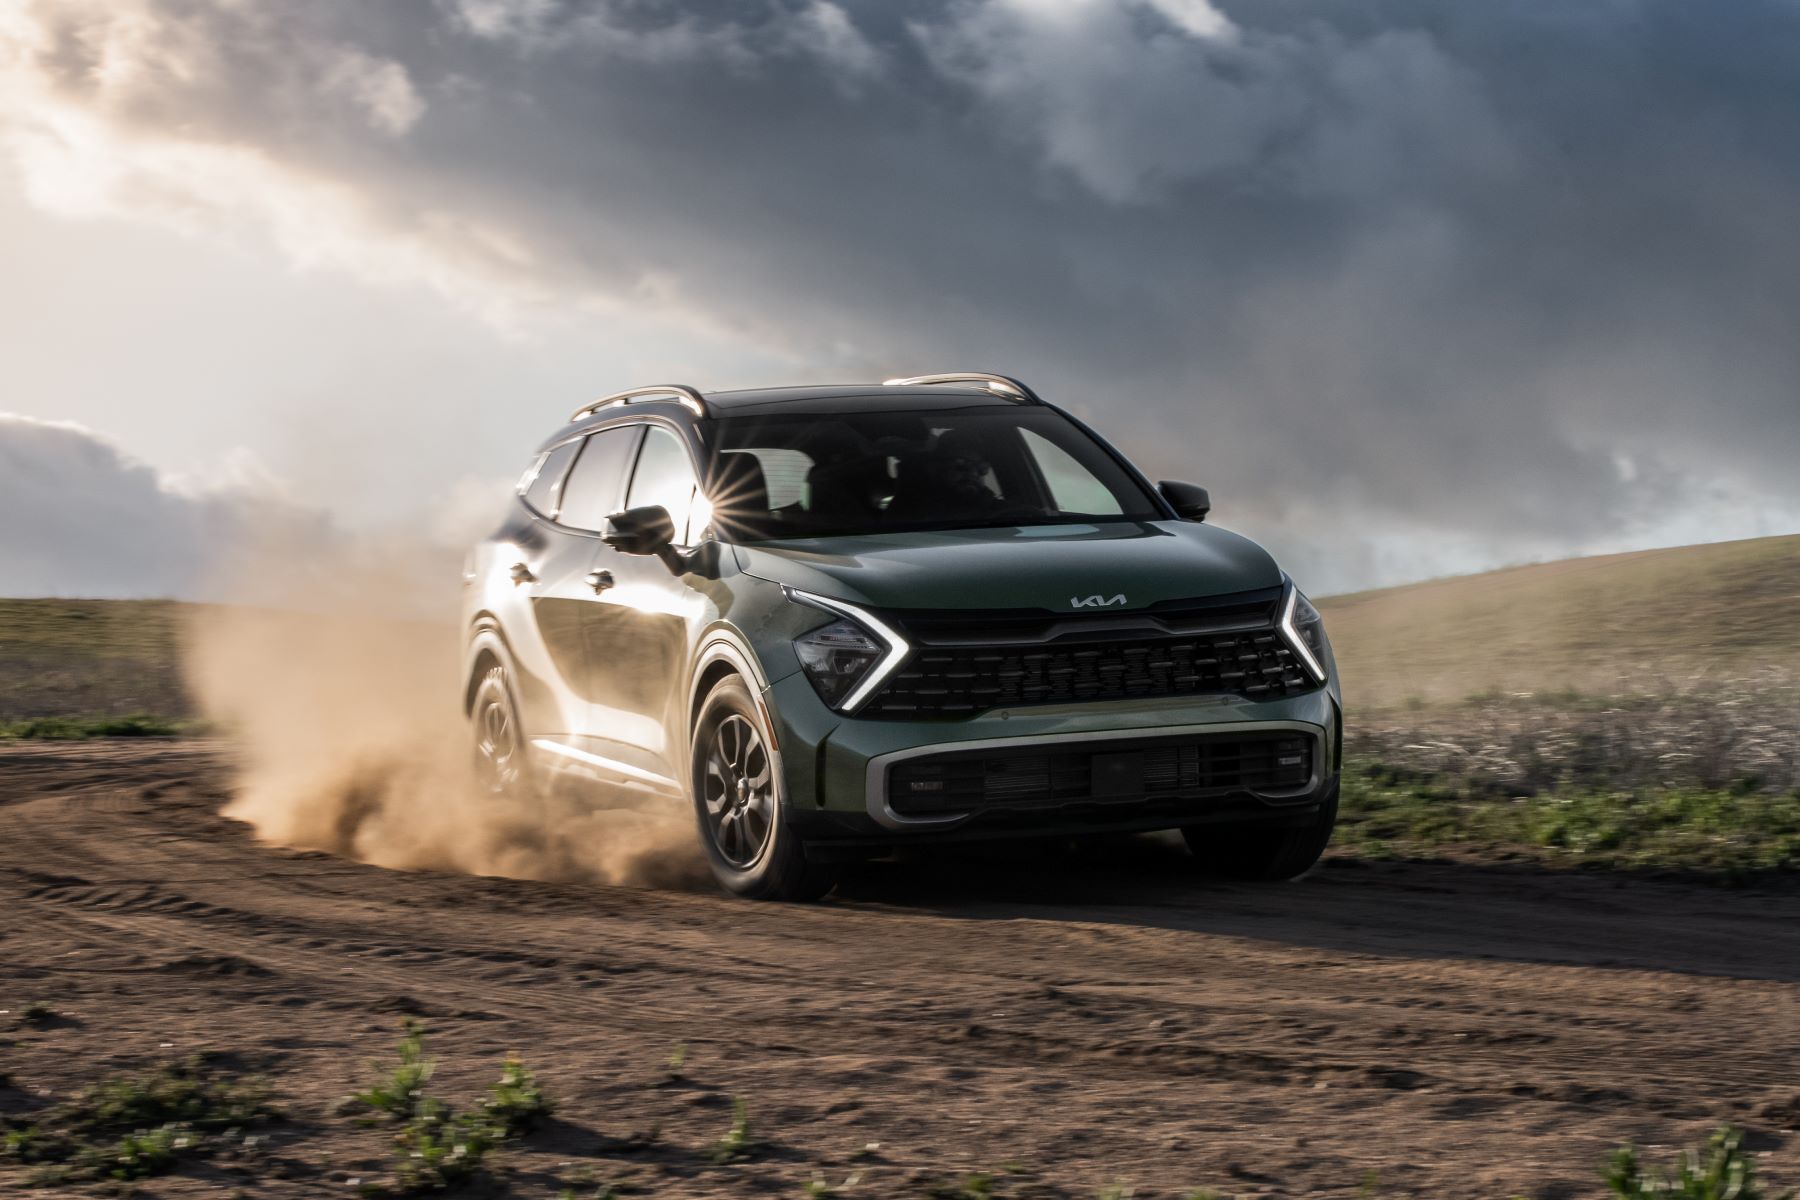 A green 2023 Kia Sportage X-Pro compact SUV model driving on a dirt road